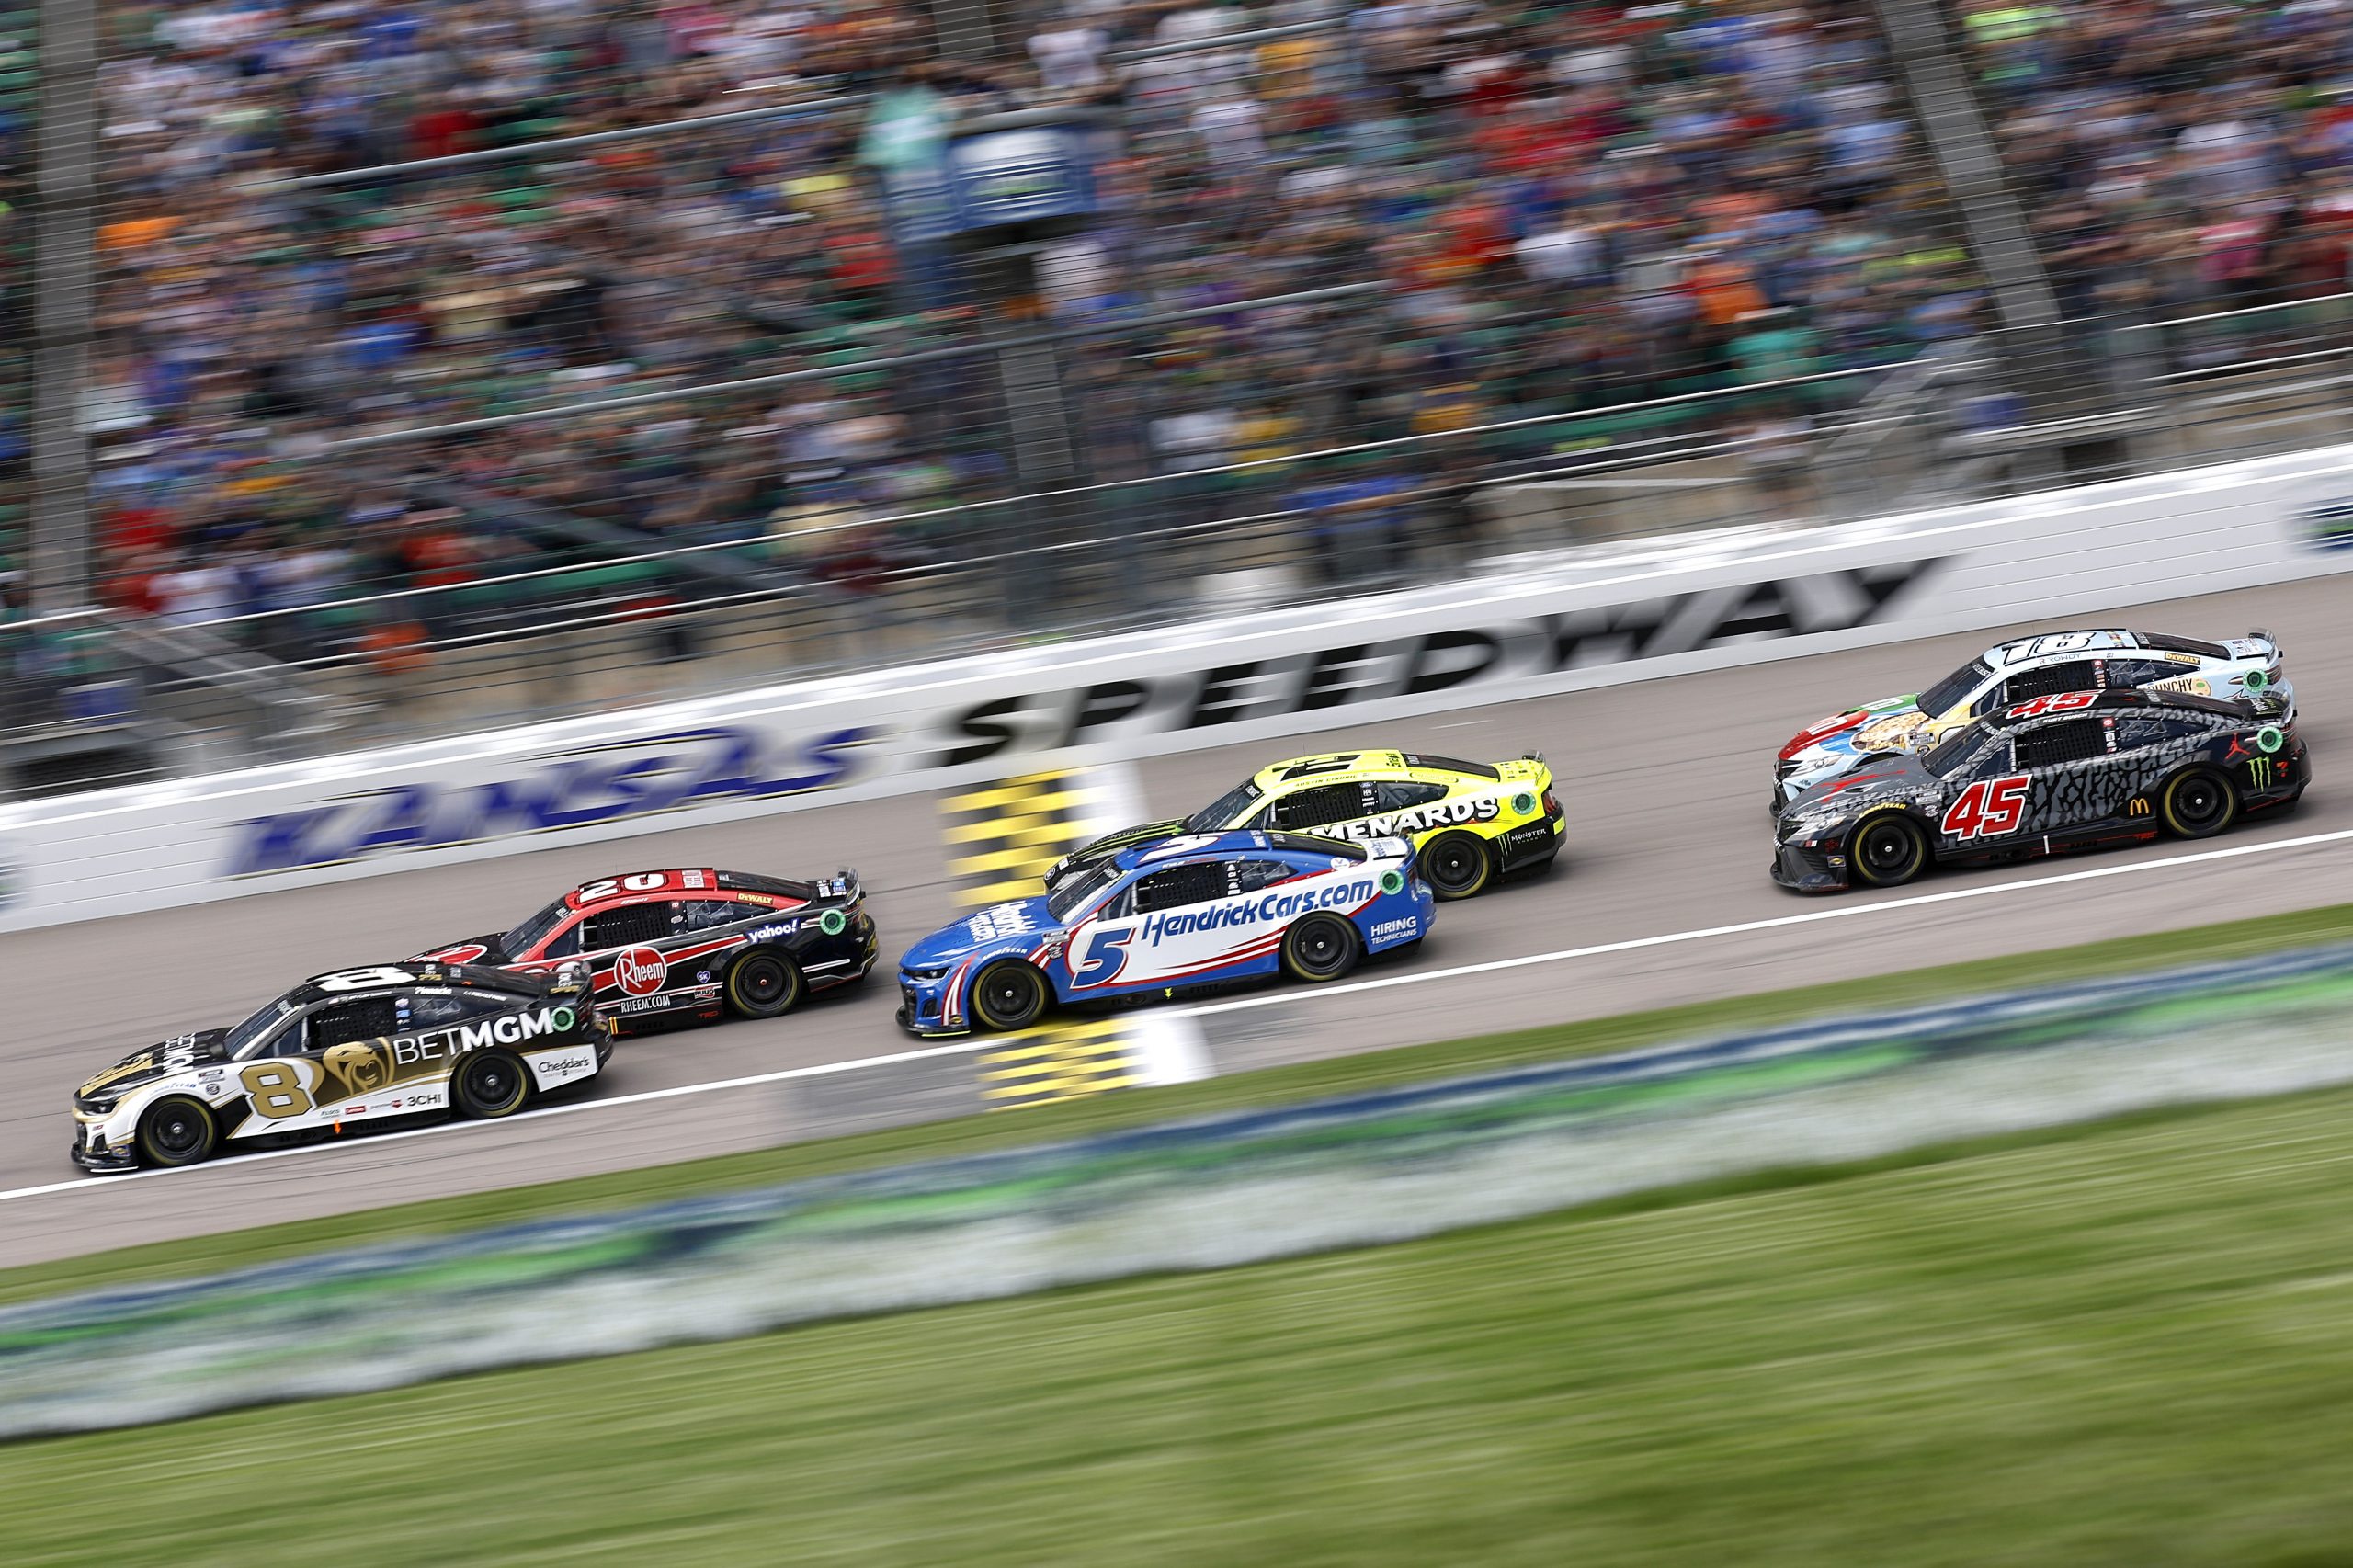 The second 2022 NASCAR Playoffs race kicks off in a somewhat cooler Kansas Speedway. (Photo: Chris Graythen | Getty Images)